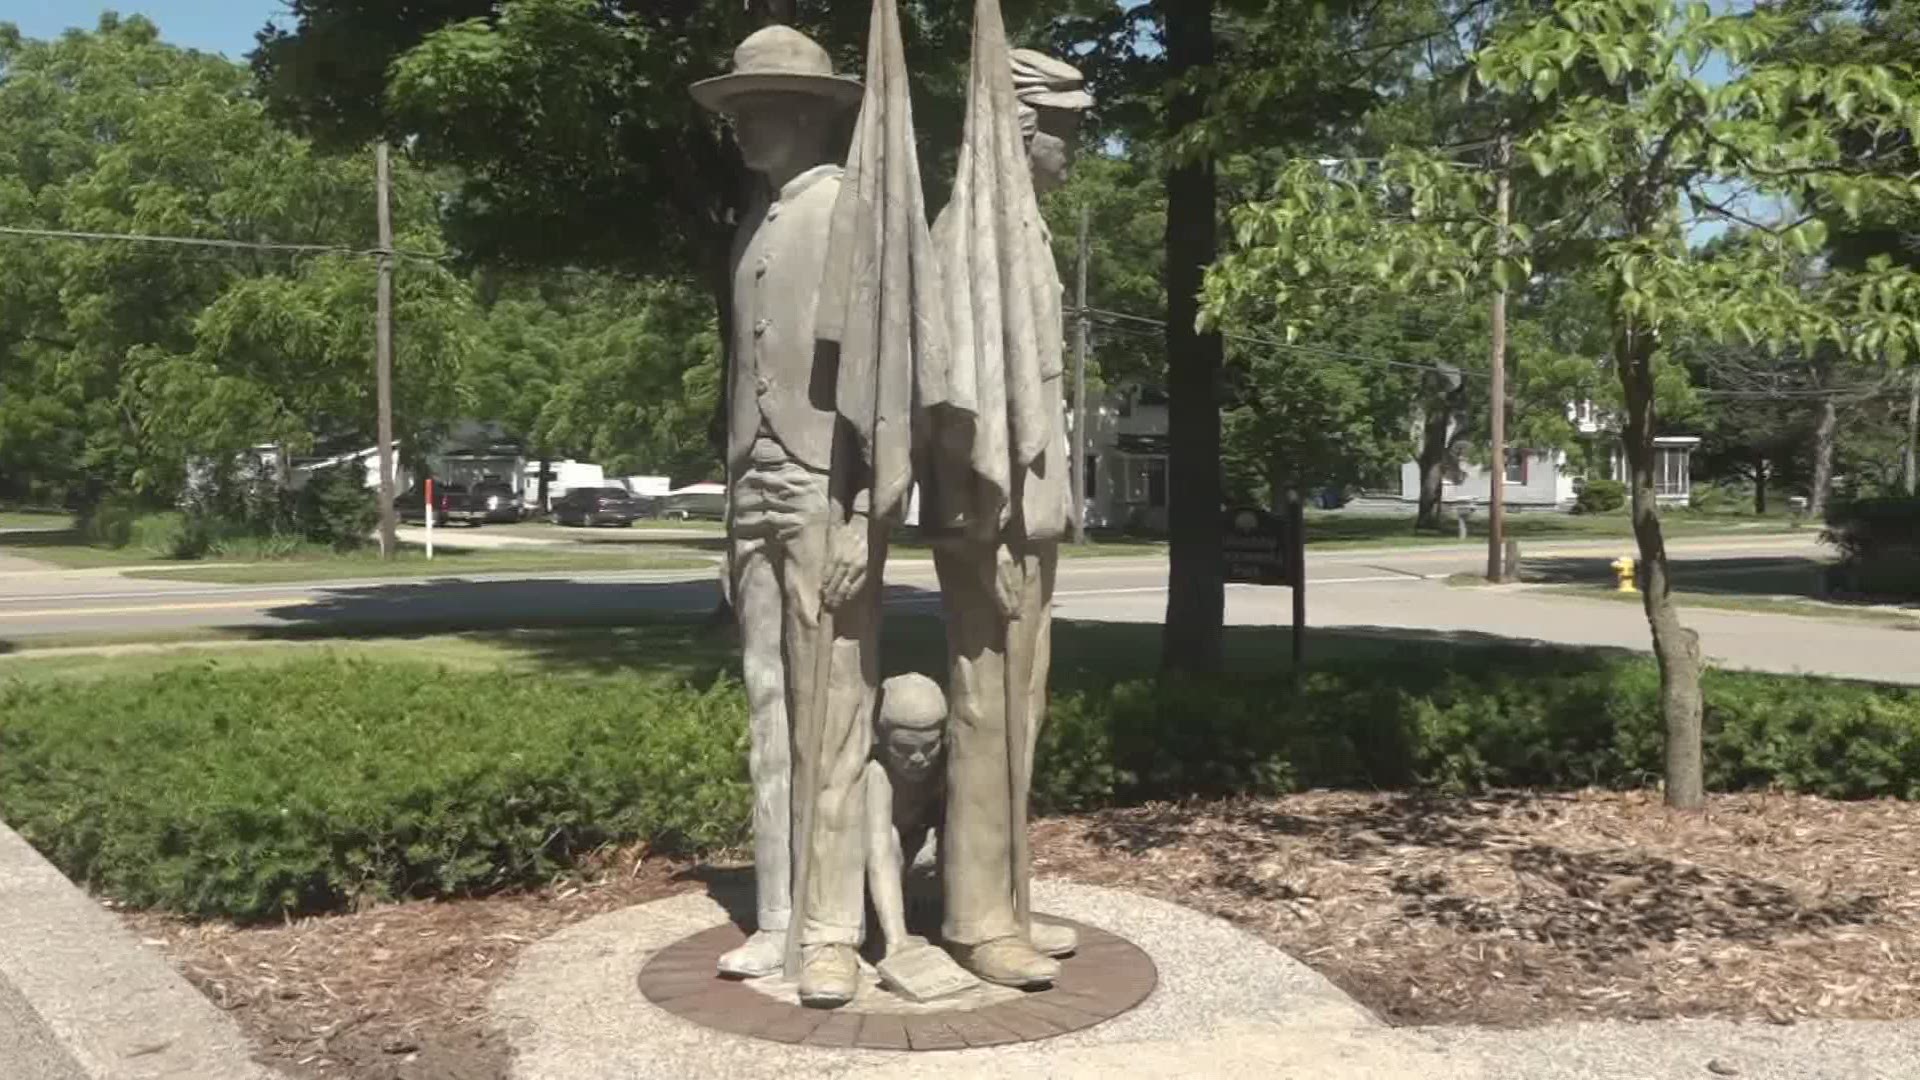 Allendale Township leaders will vote next week on removing parts of a Civil War statue.